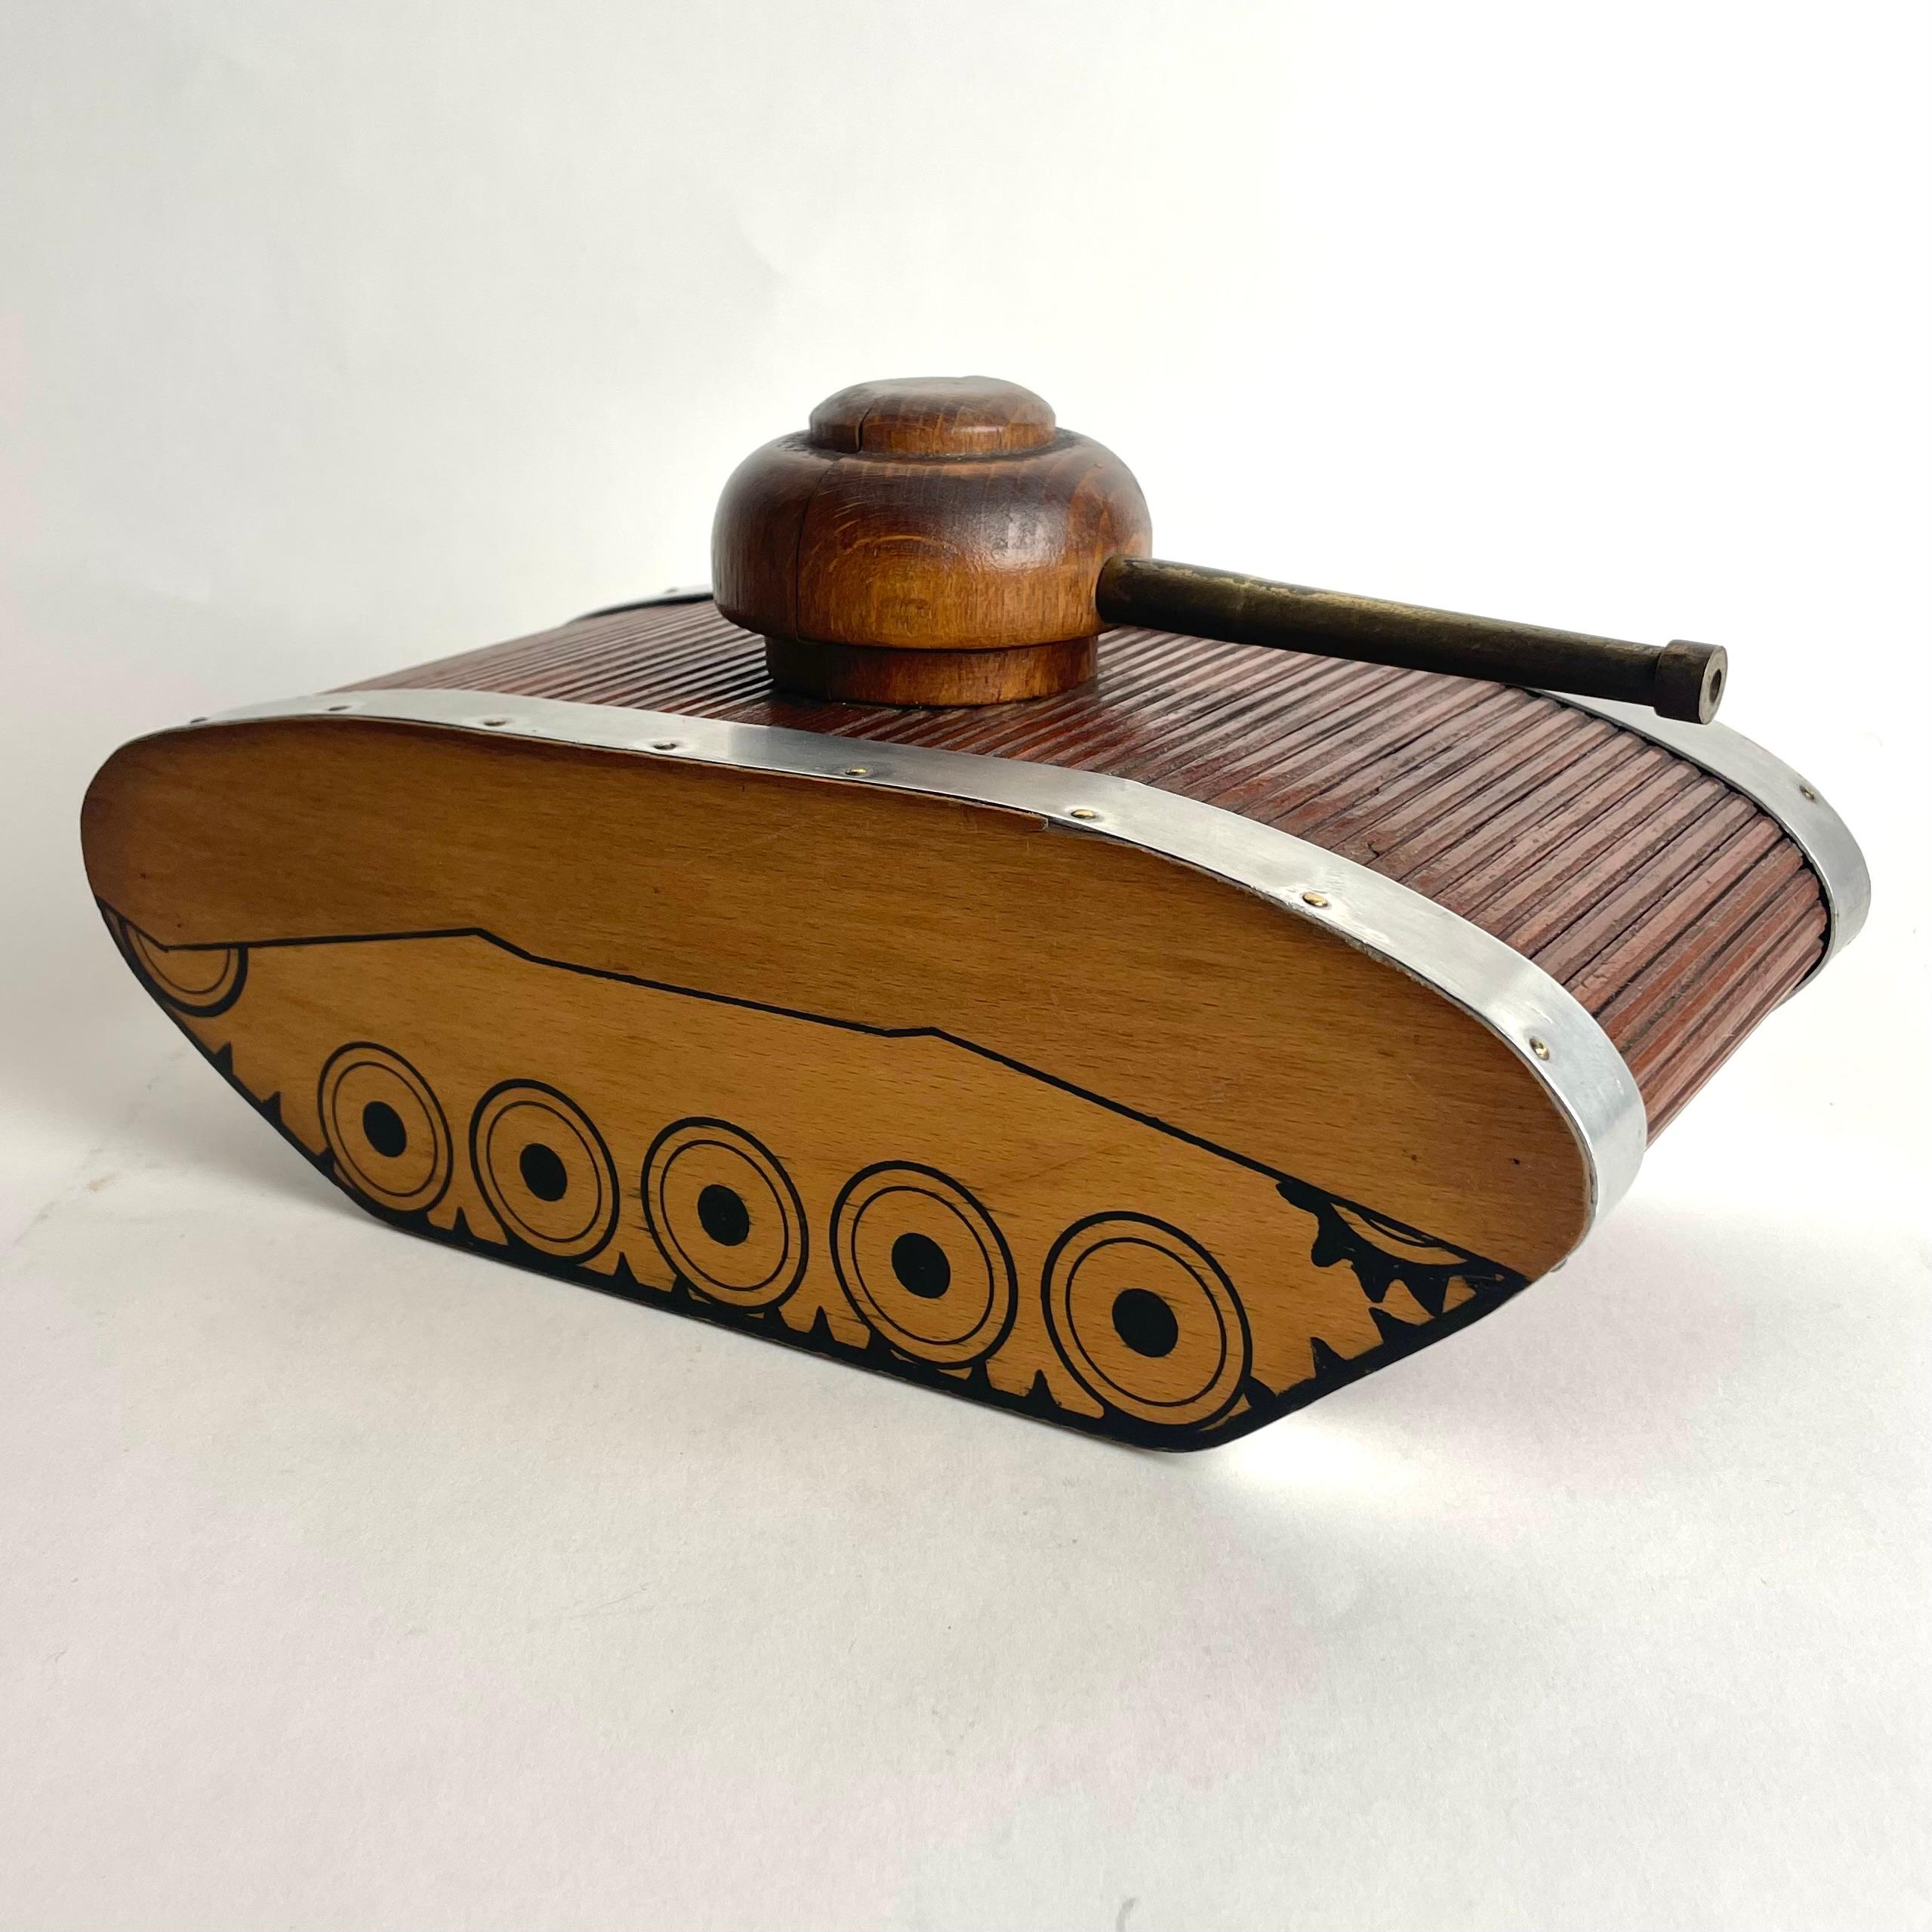 Decorative Cigar or Cigarette Box in the shape of a tank from the 1940s In Good Condition For Sale In Knivsta, SE